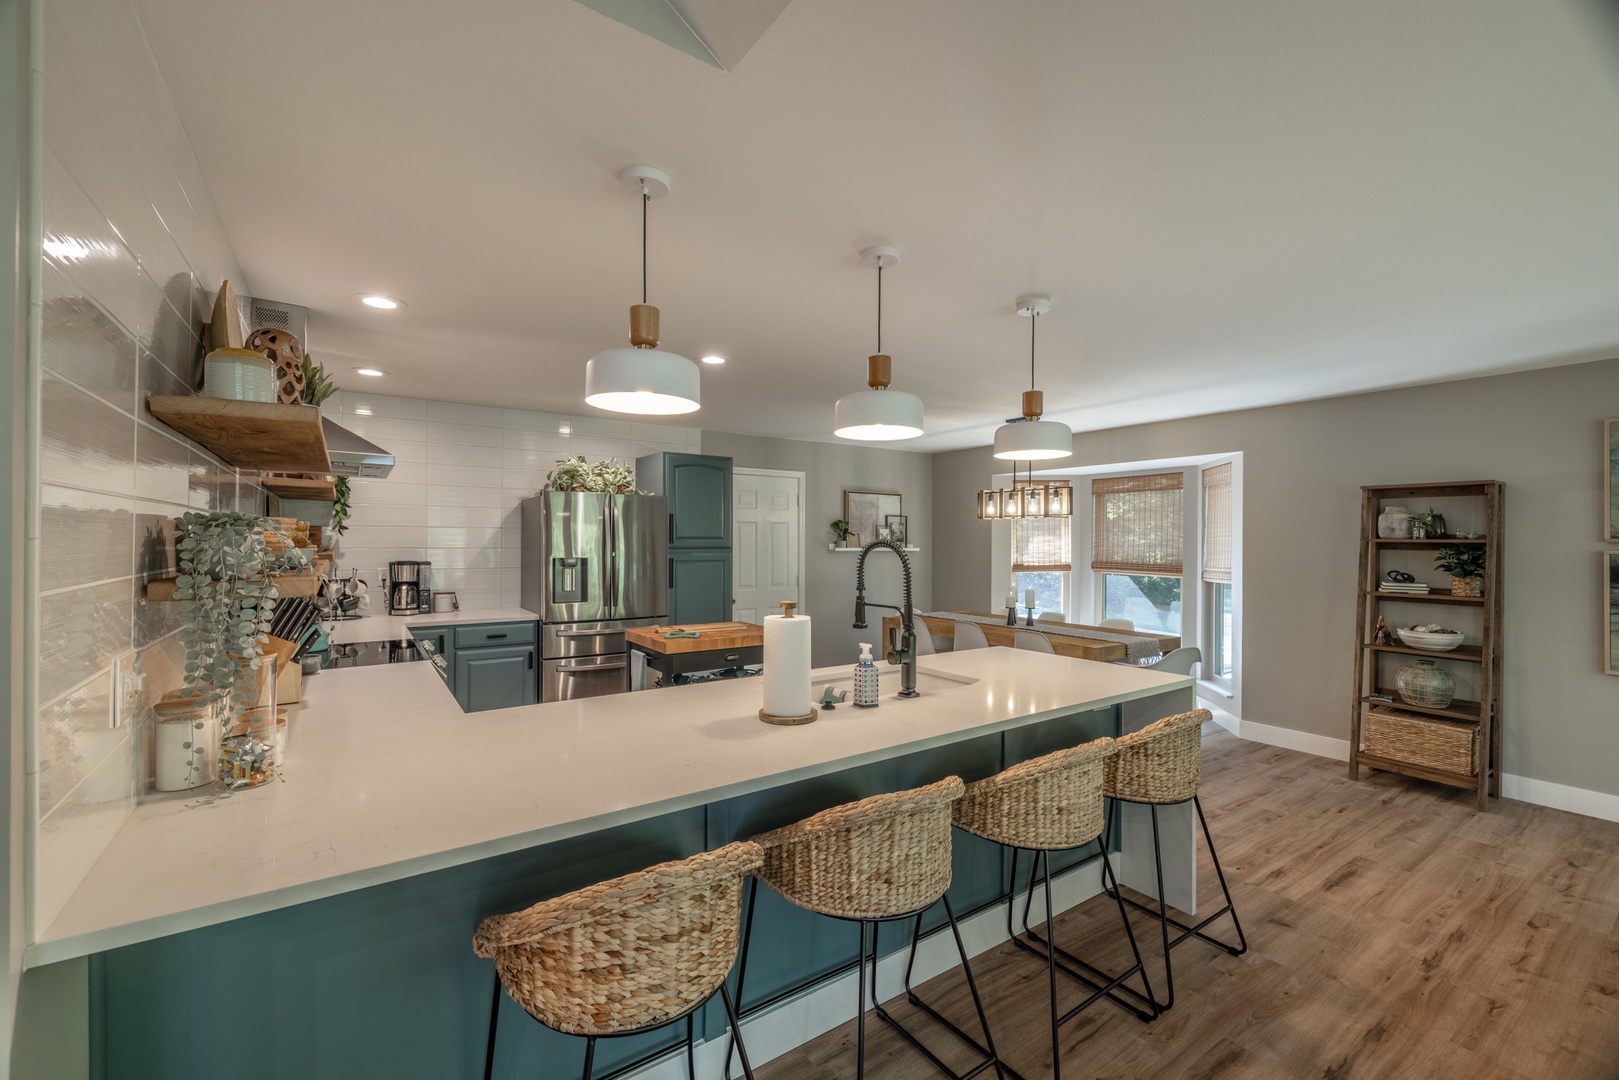 Plenty of countertop space for large, family style meals